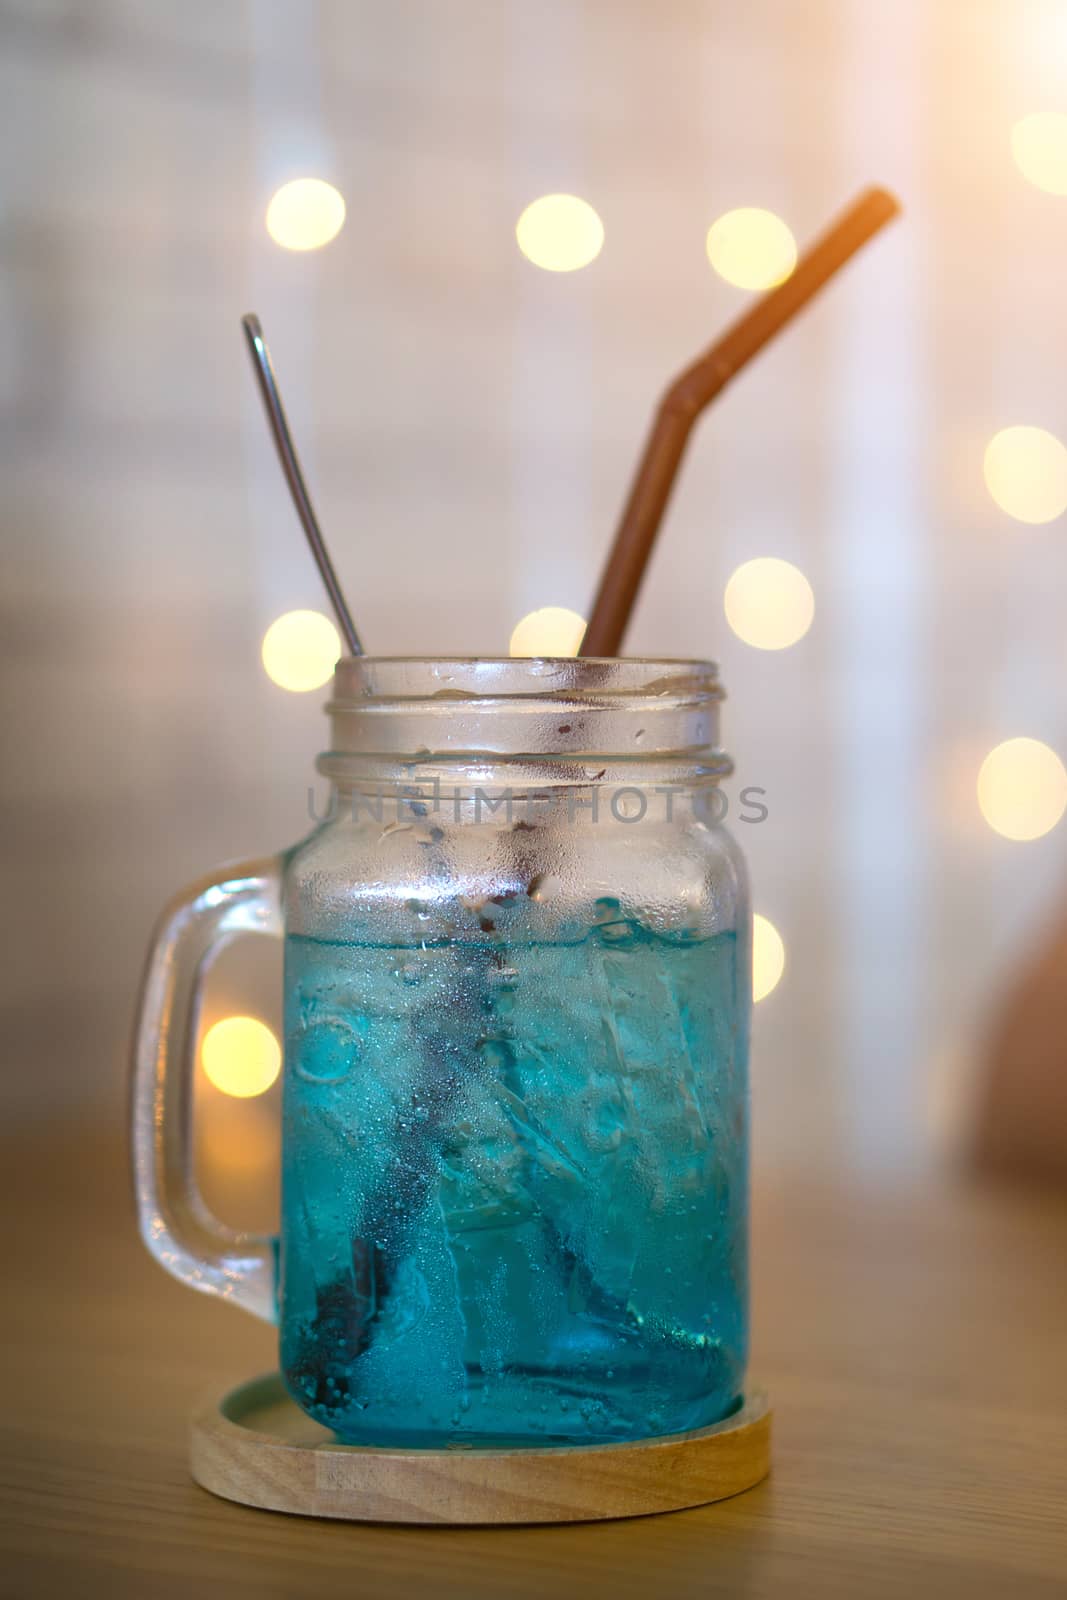 Cold blue cocktail drink, Blue Hawaii Italian Soda or sweetwater and yellow bokeh background in cafe.